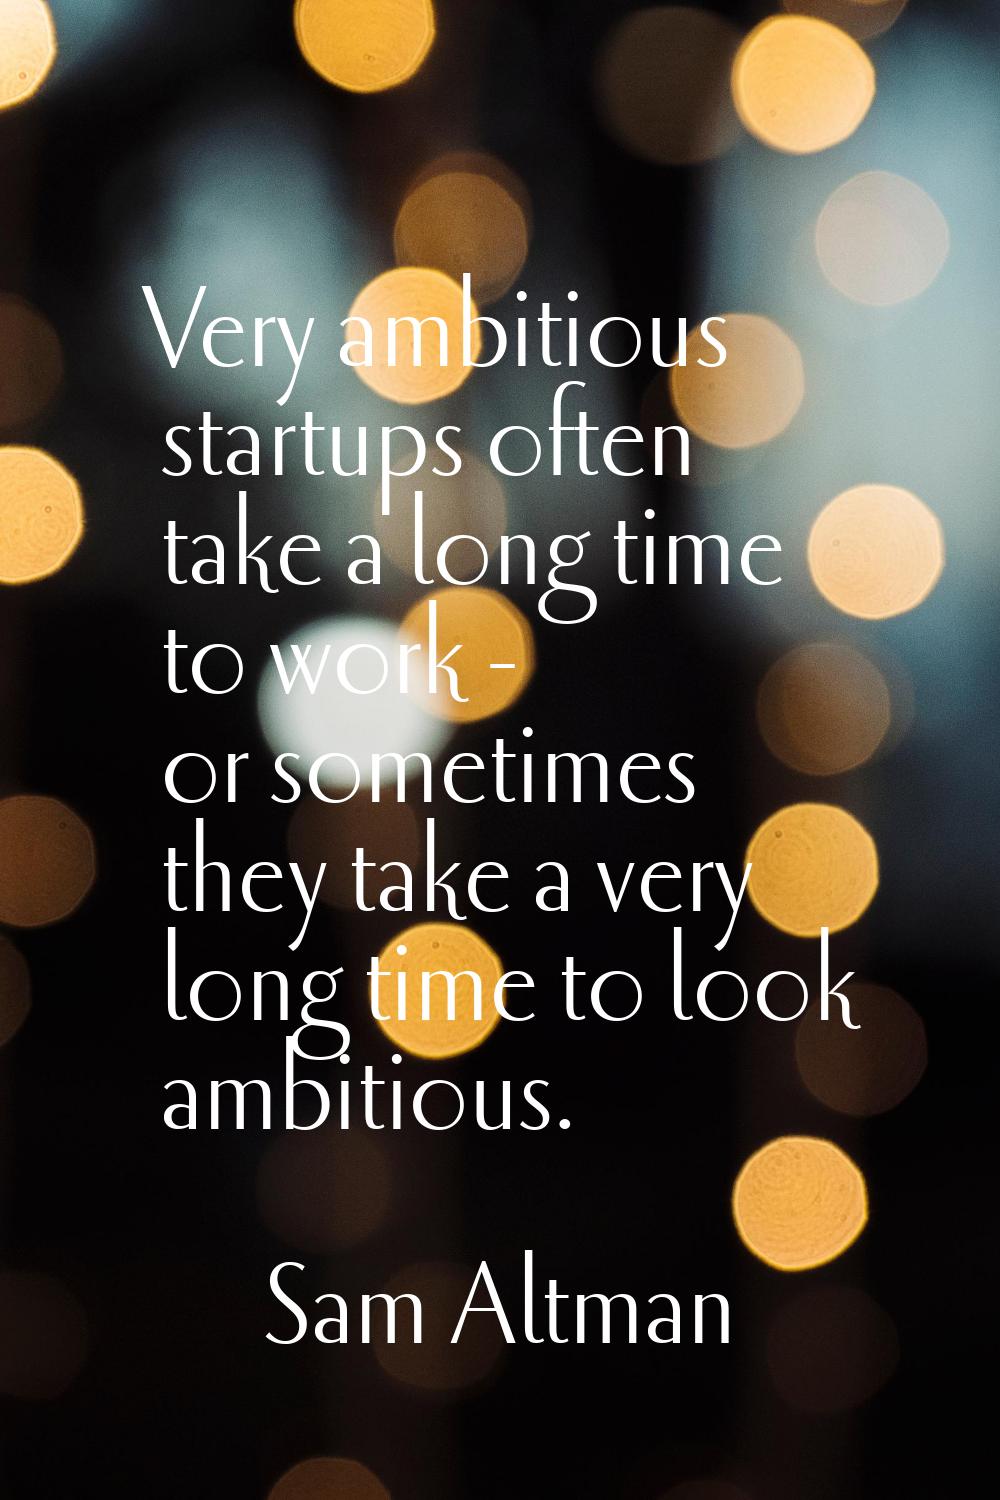 Very ambitious startups often take a long time to work - or sometimes they take a very long time to